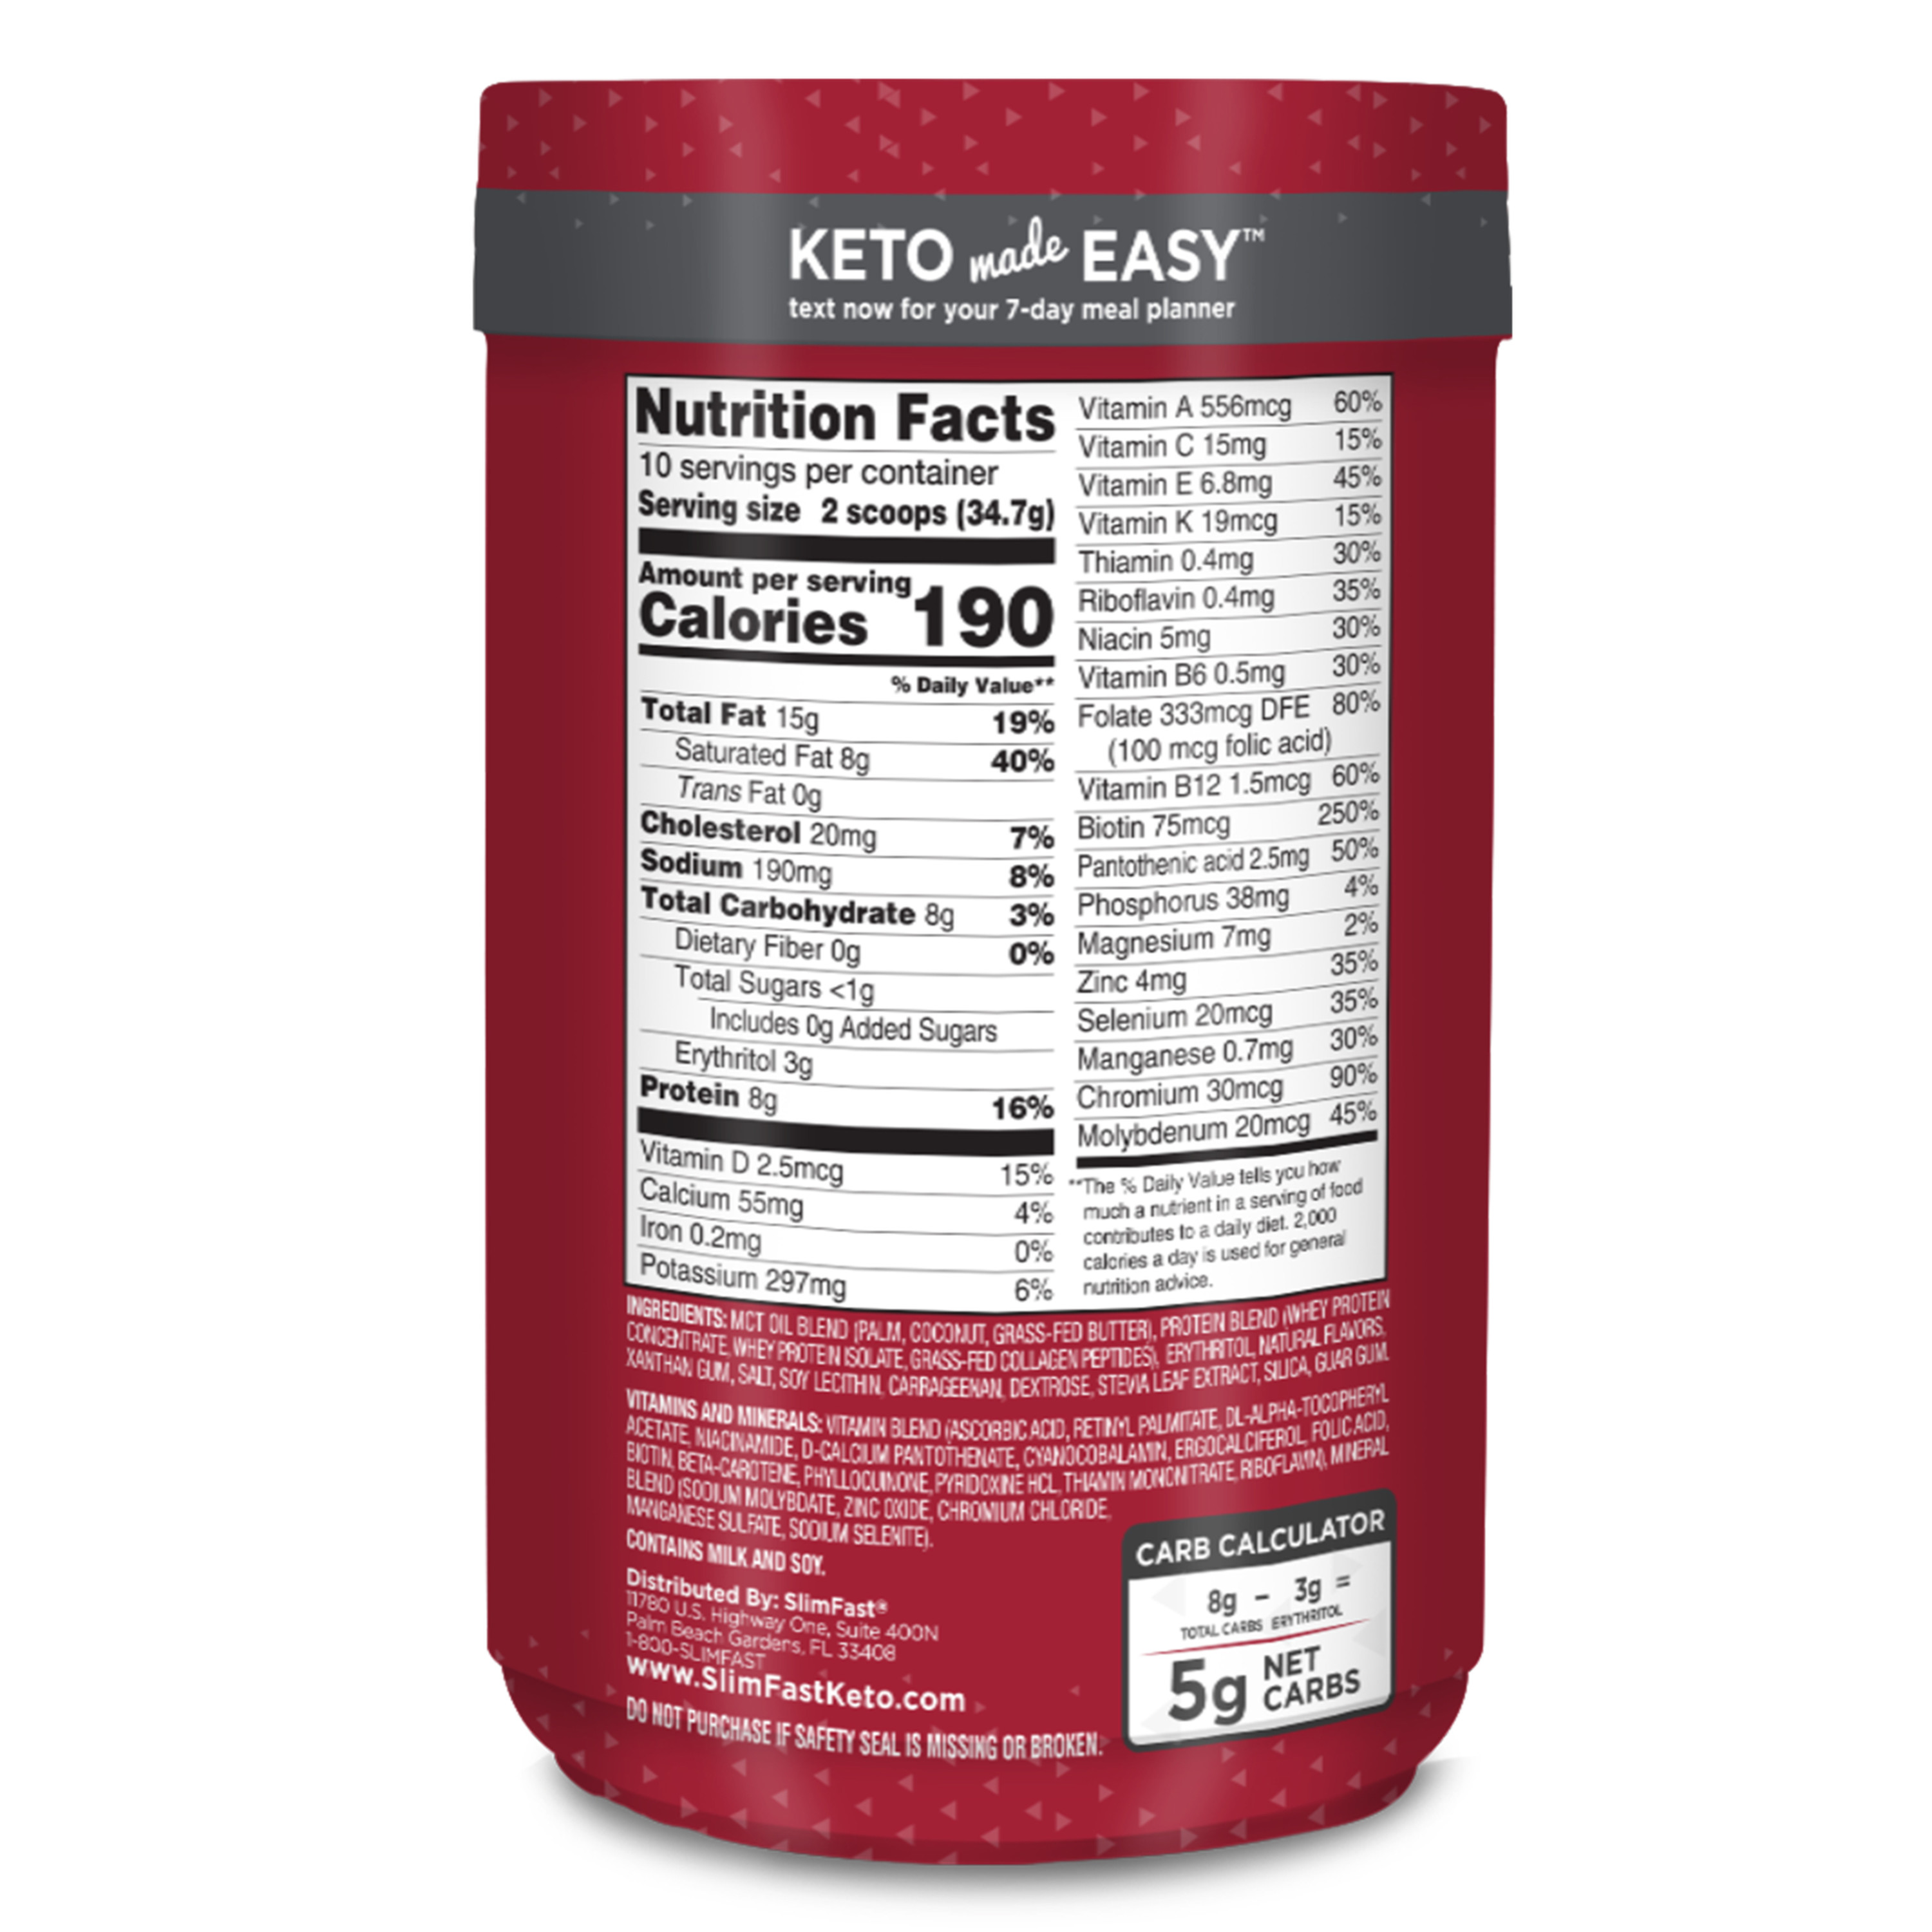 SlimFast Keto Meal Replacement Shake Powder, Vanilla Cake Batter, 12.2 Oz. Canister (10 servings) - image 2 of 8